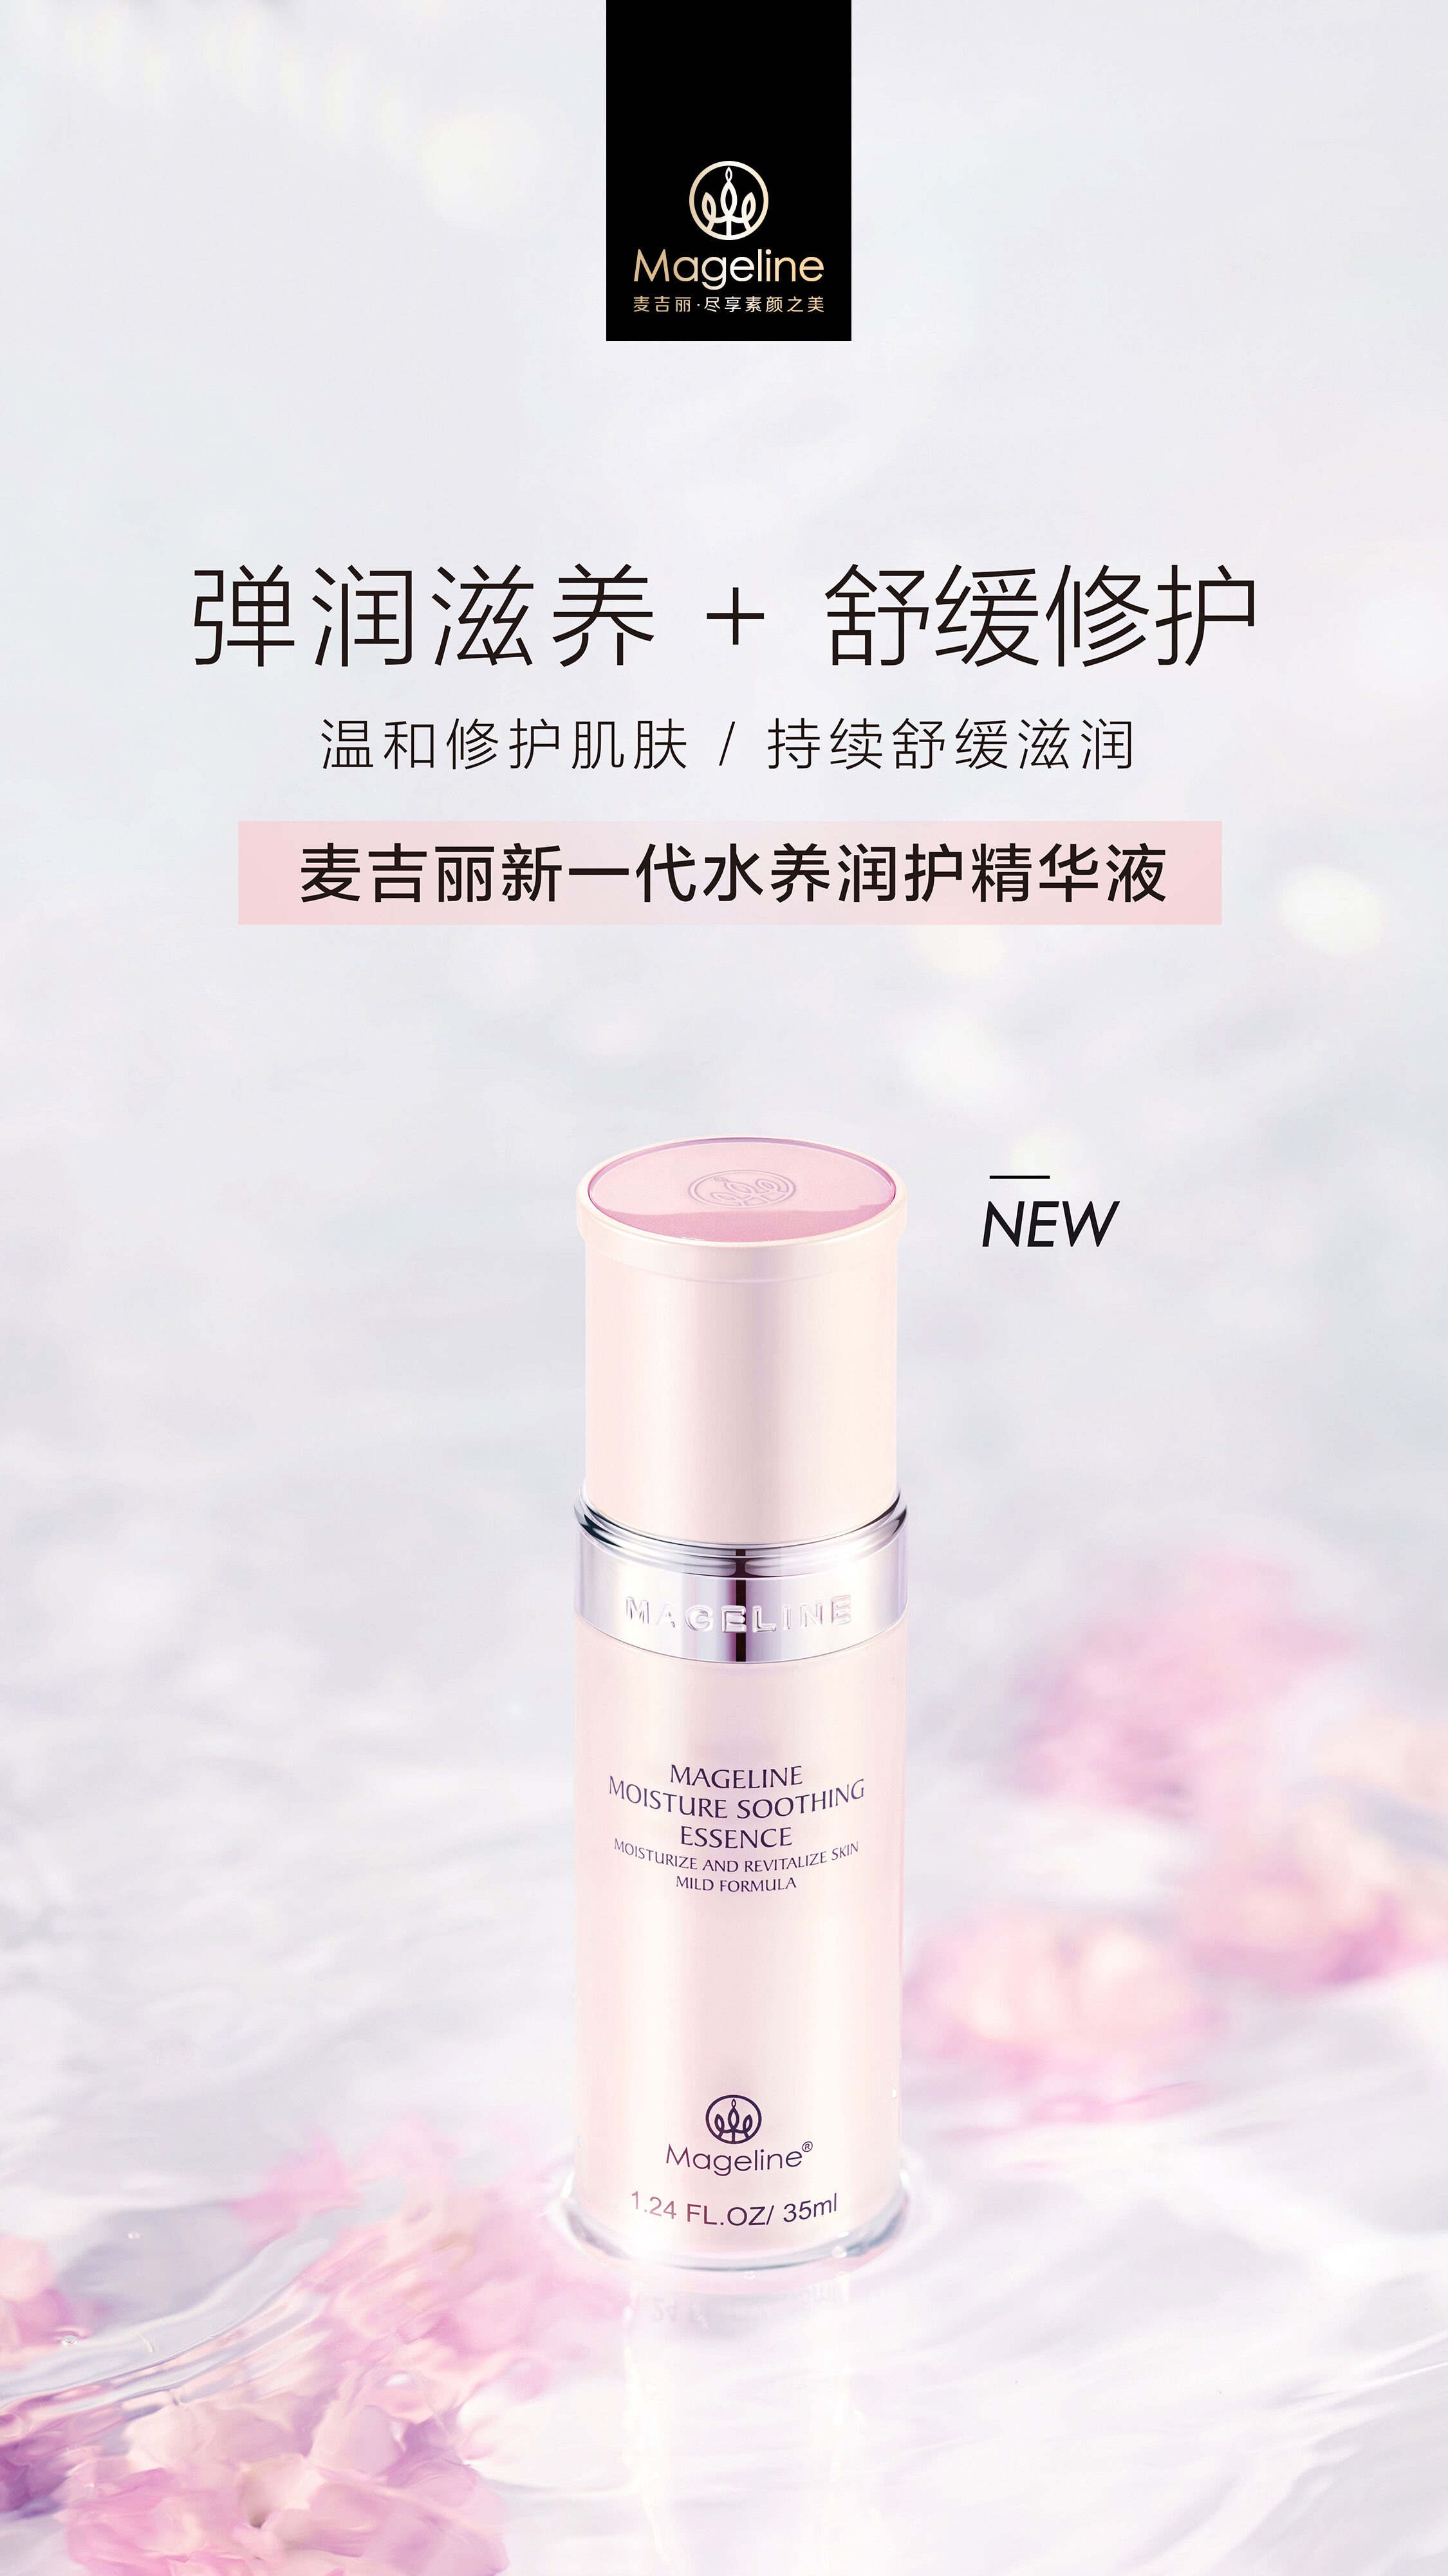 Mageline Moisture Soothing Essence